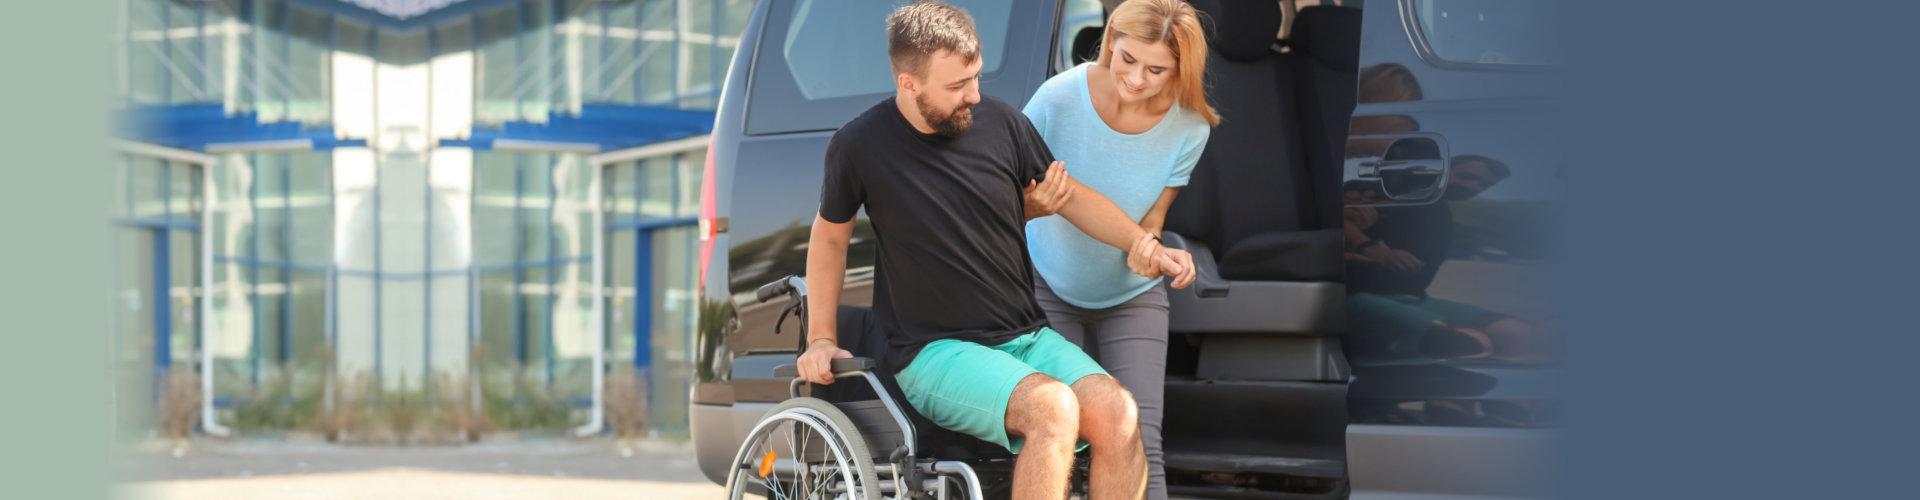 Woman helping handicapped man to sit in car